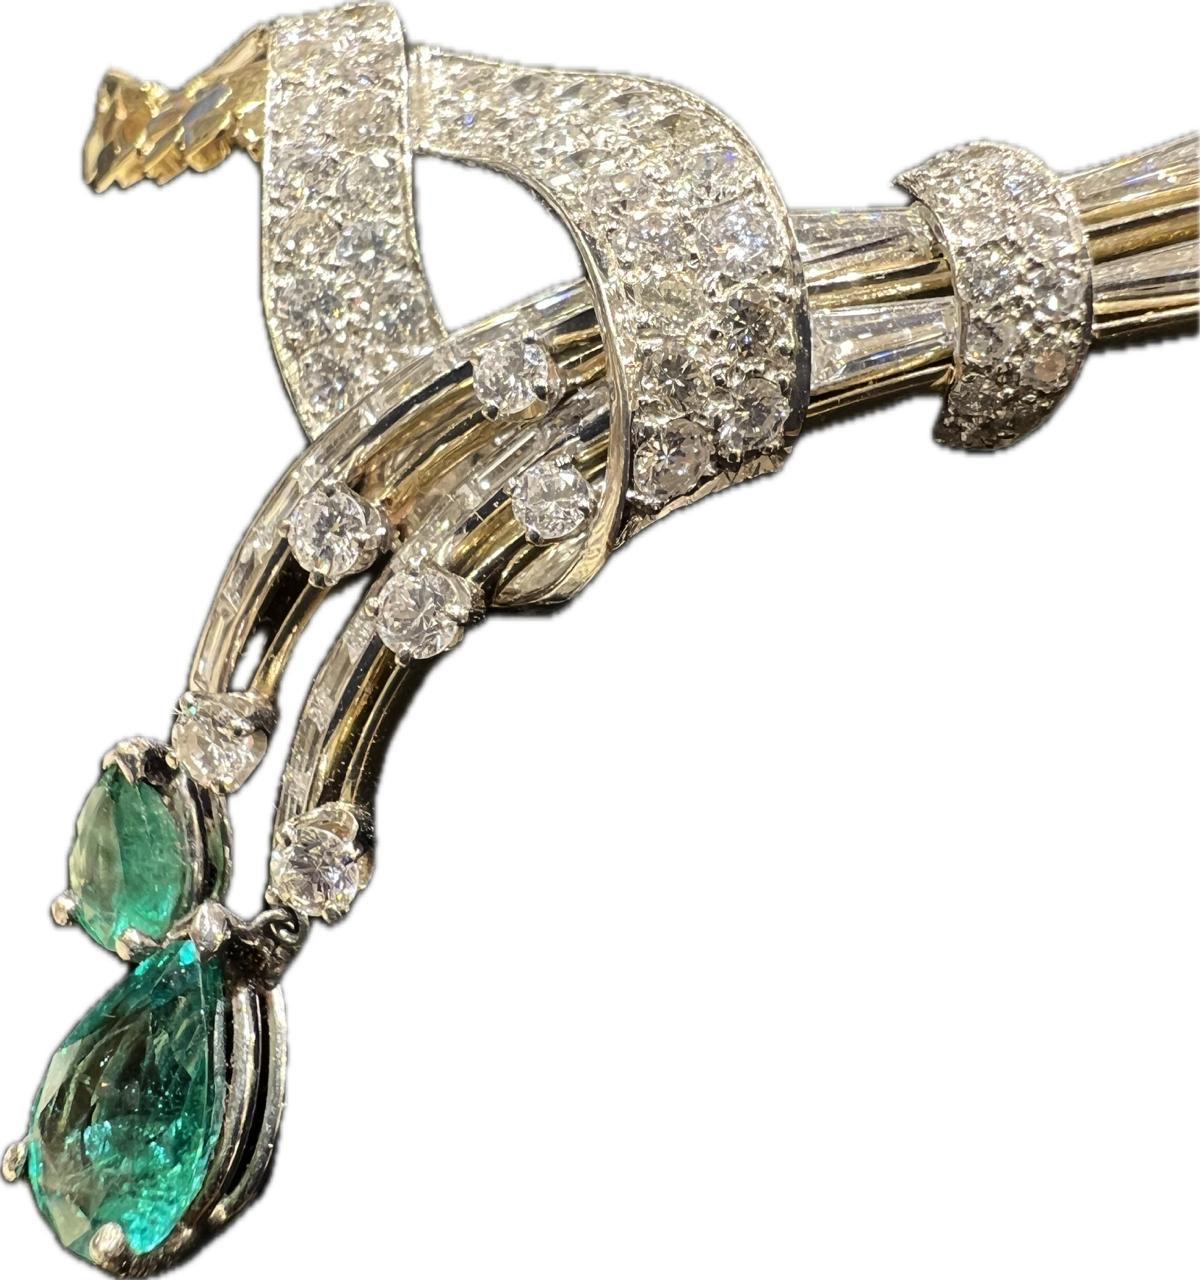 
This stunning 14K yellow gold necklace features beautiful emerald stones and sparkling diamonds, making it the perfect addition to any jewelry collection. The piece is IGI certified and comes with a certification for added peace of mind. The